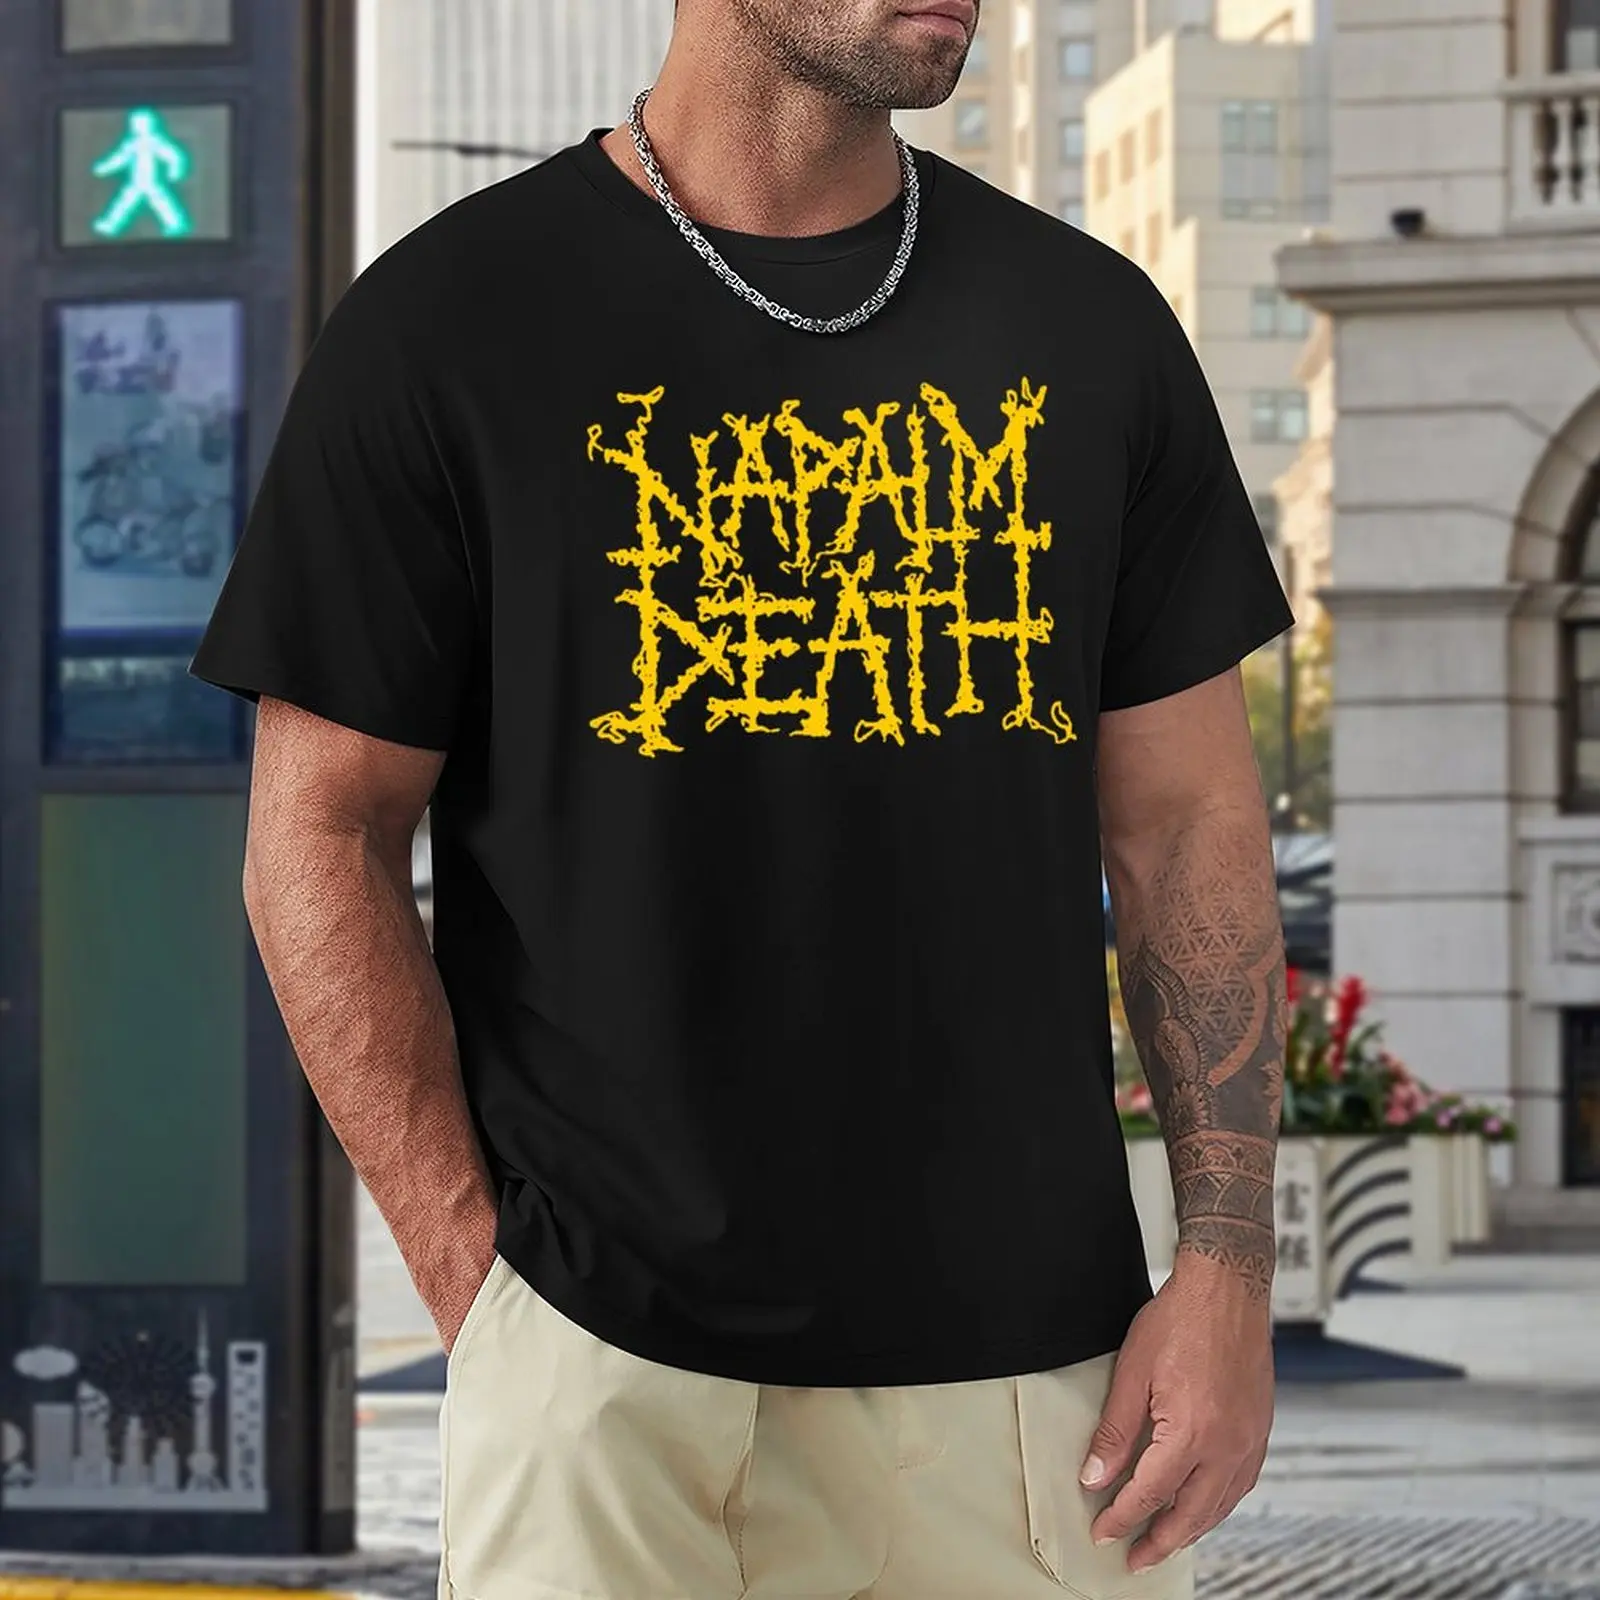 Napalm Death Band Metal Grind UK Logo T Shirts for Men Cotton Awesome T- Shirts Round Collar Tees Short Sleeve Present